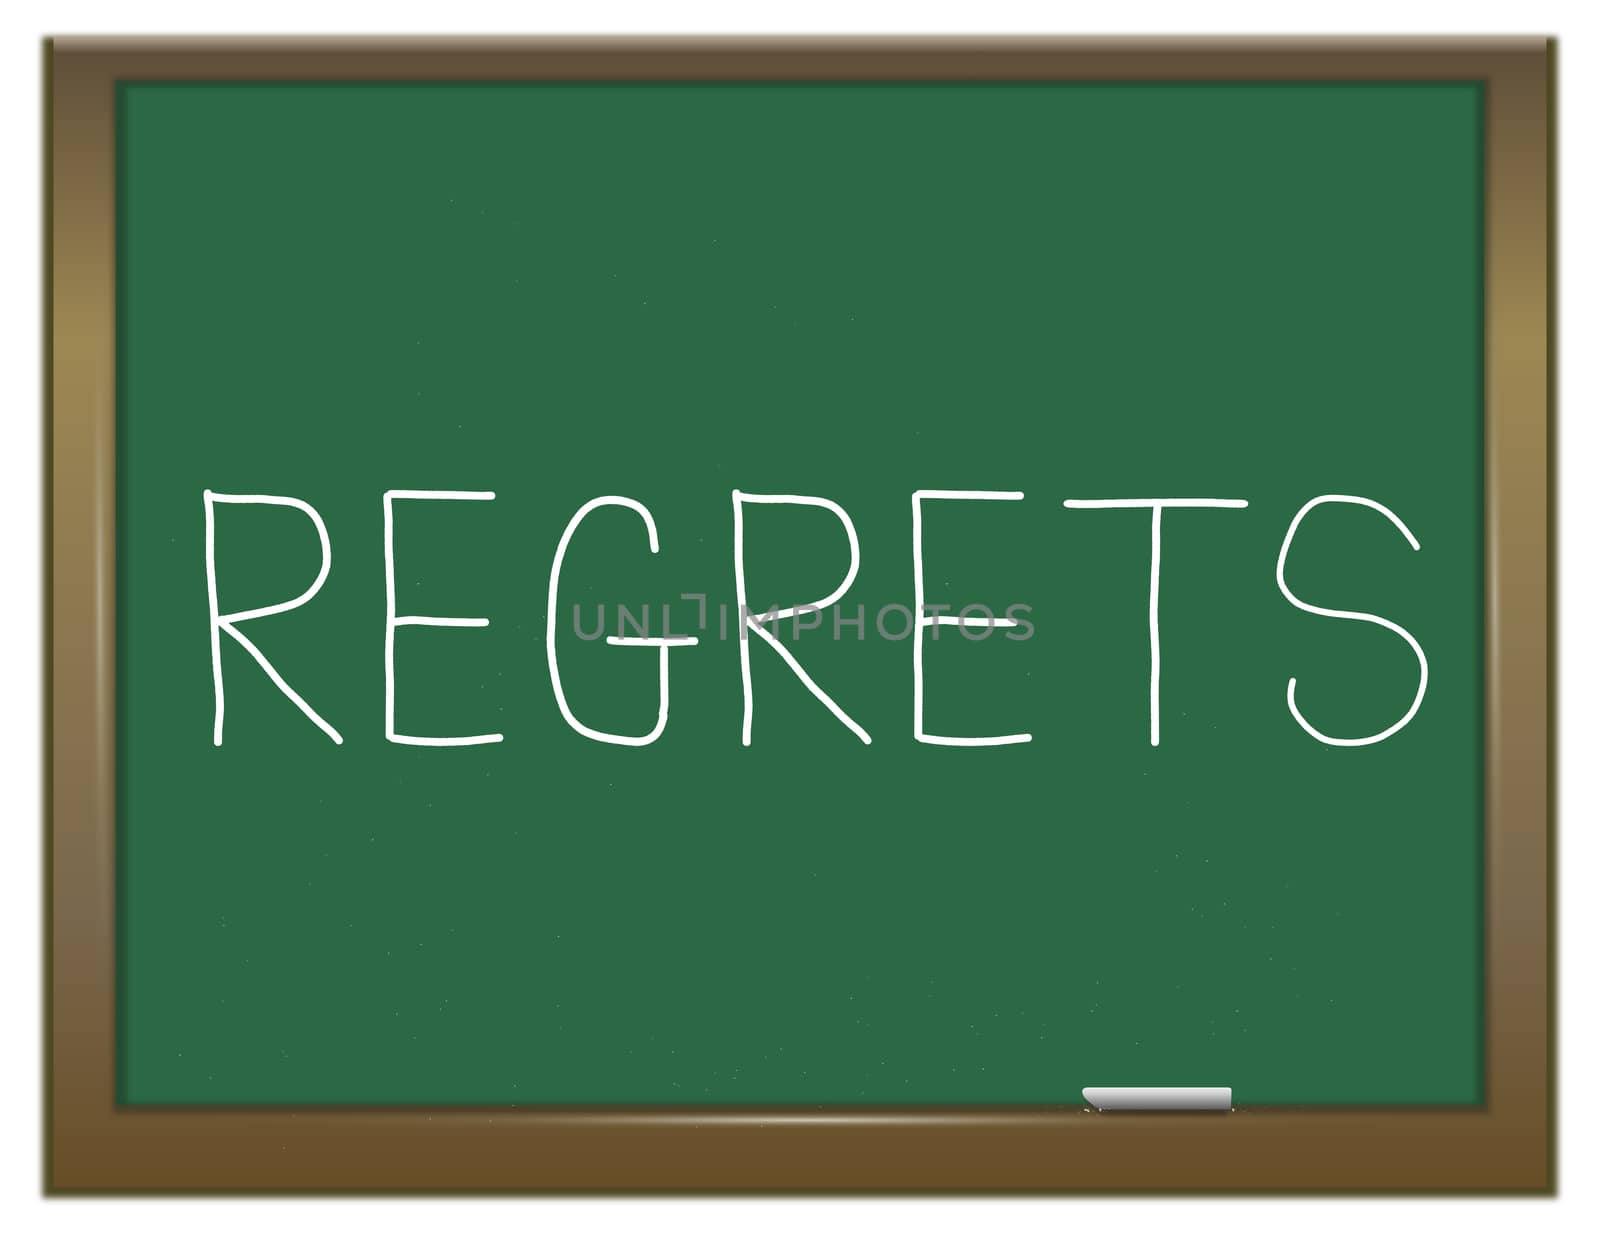 Regrets word concept. by 72soul